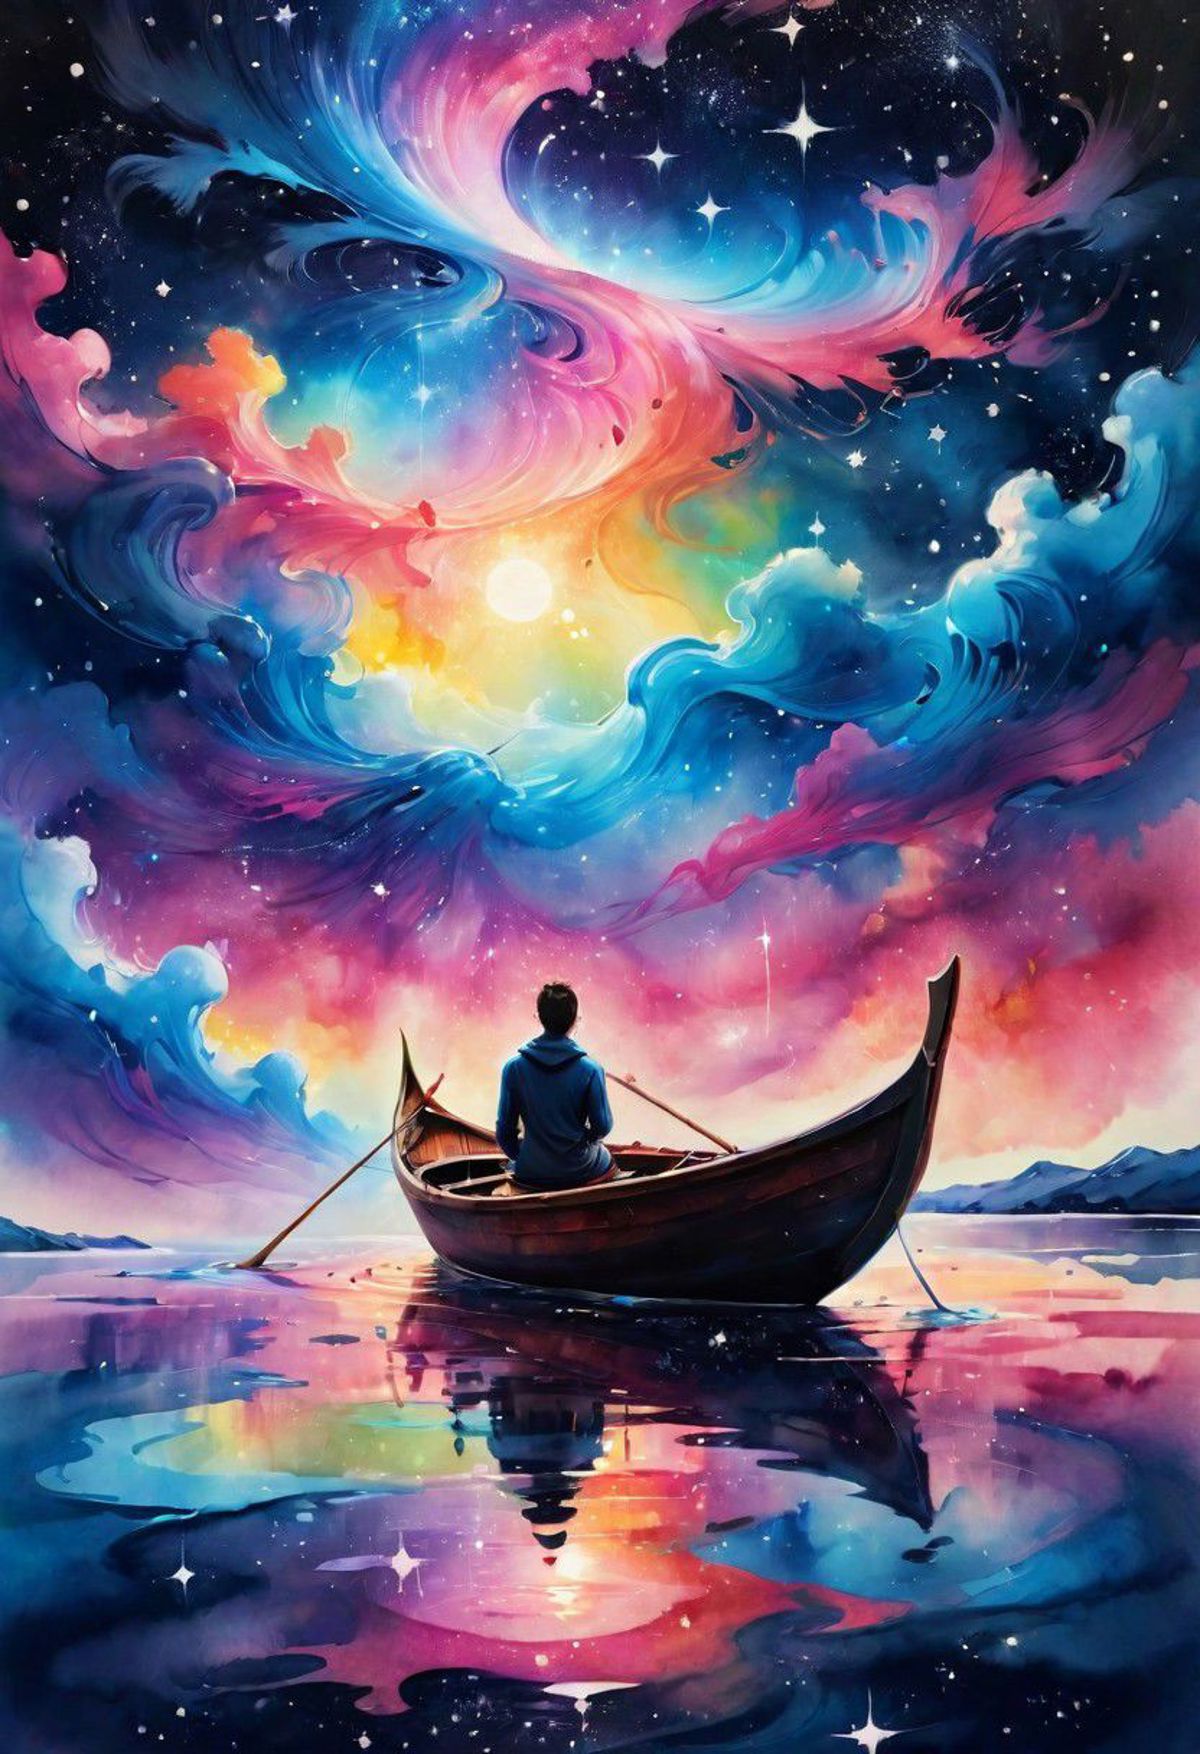 A man rowing a boat in a starry sky at night.